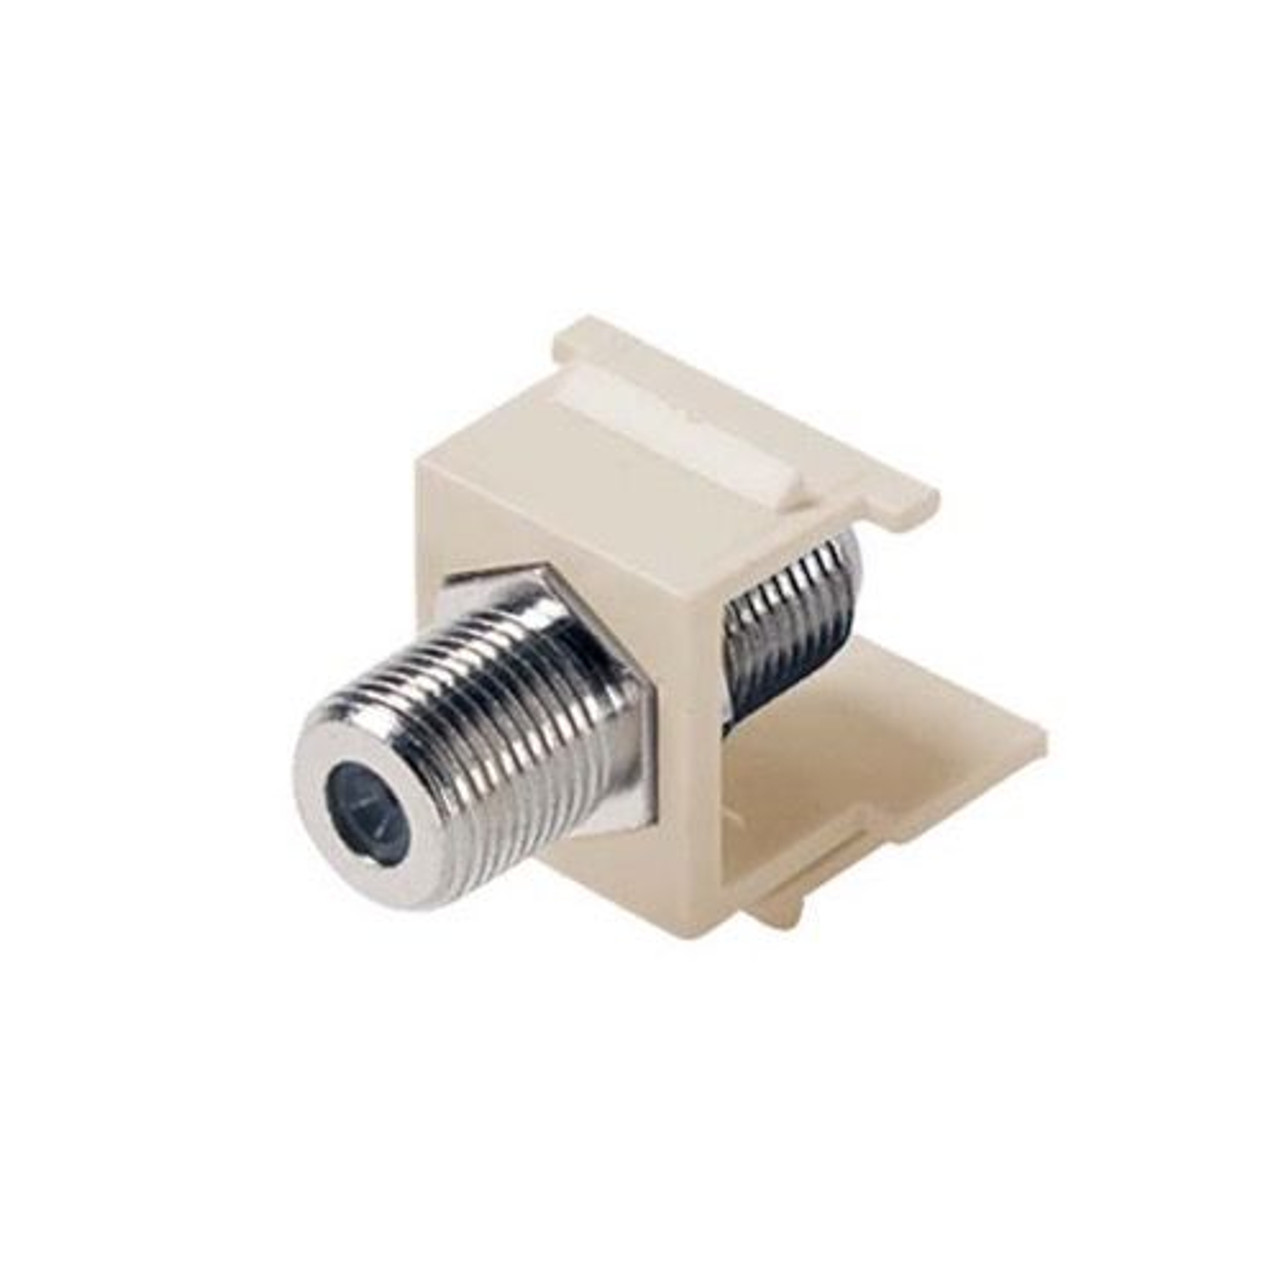 Eagle 10 Pack F Keystone Jack Coupler Insert Light Almond Connector F-81 Female to Female Barrel Light Almond F81 Insert Jack 75 Ohm Snap-In F-81 QuickPort Coax Cable TV Video Up To 1 GHz, Part # AF81SLA